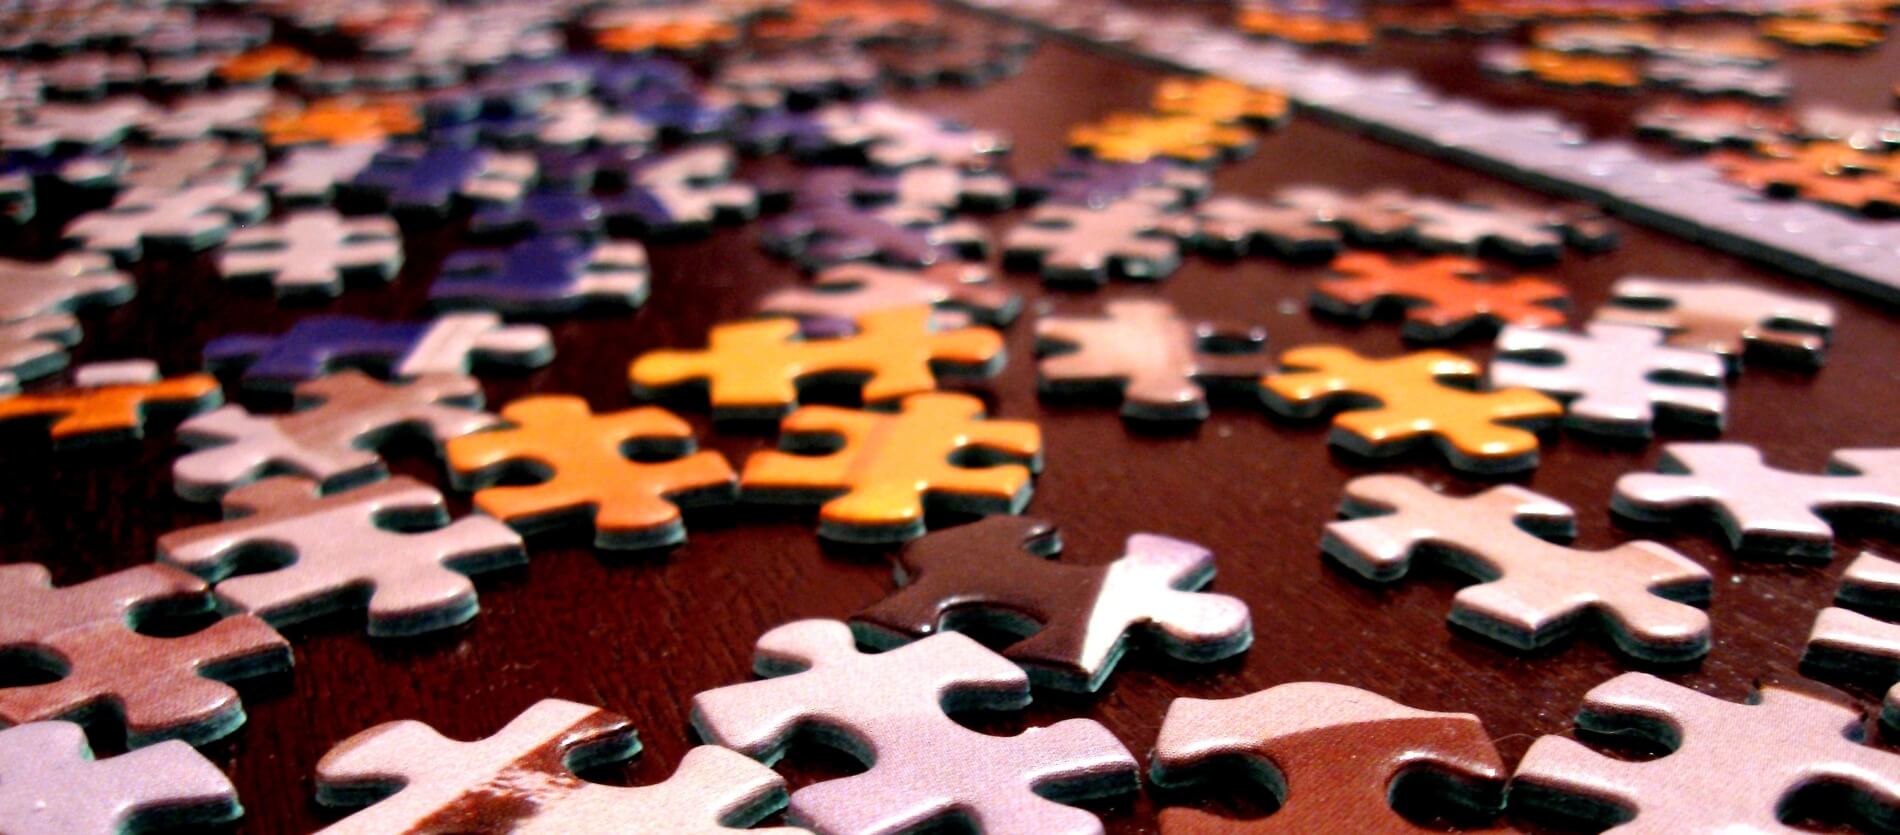 Jigsaw puzzle pieces on a wooden surface